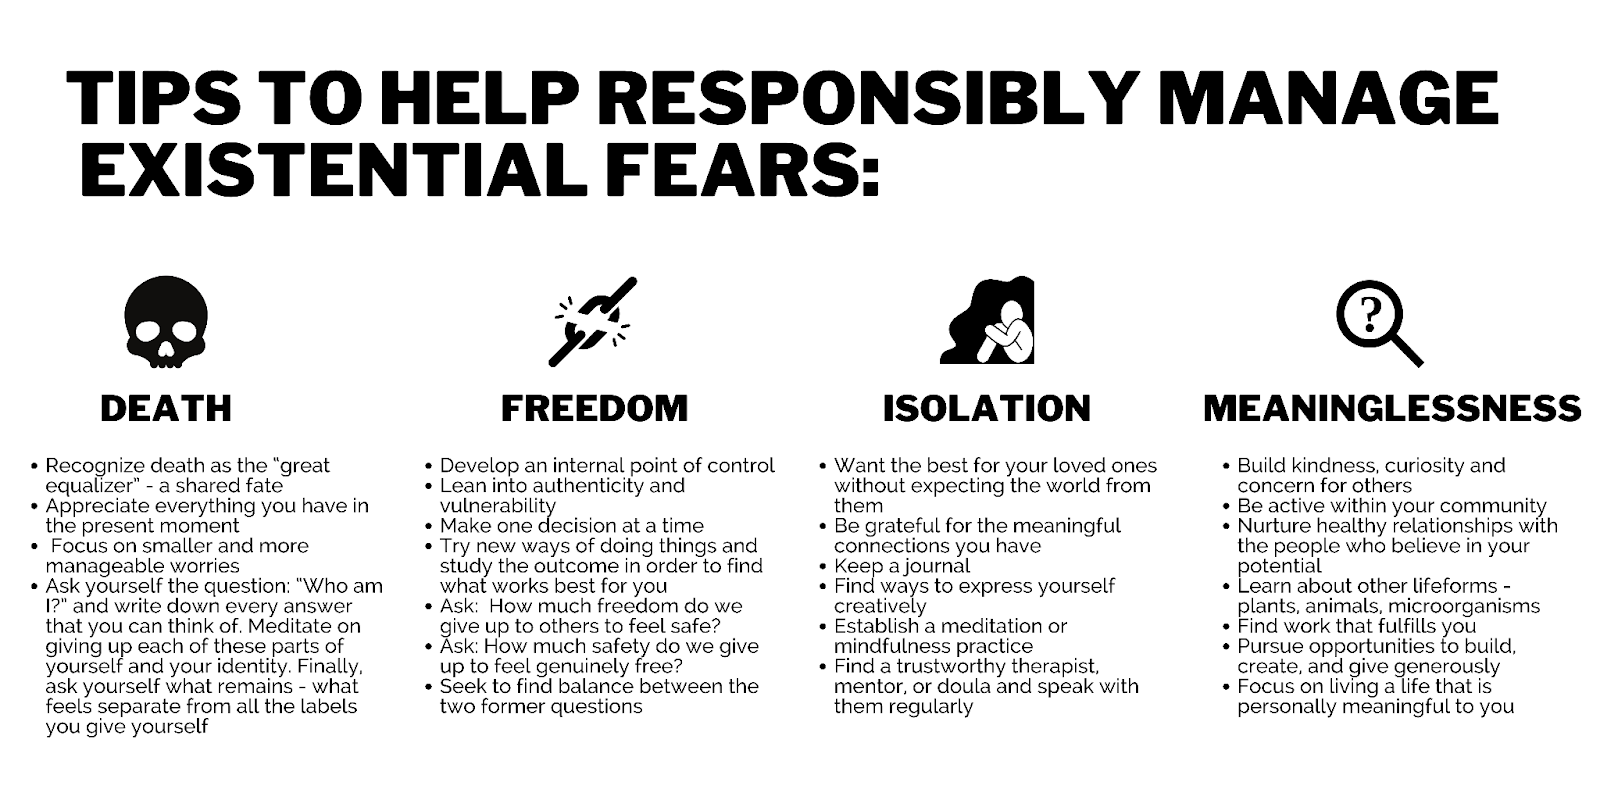 TIPS TO HELP RESPONSIBLY MANAGE EXISTENTIAL FEARS:

Death:
Recognize death as the great equalizer— shared fate
Appreciate everything you have in the present moment
Focus on smaller and more manageable worries
Ask yourself the question: Who am I? and write down every answer that you can think of. Meditate on giving up each of these parts of yourself and your identity. Finally, ask yourself what remains - what feels separate from all the labels you give yourself

Freedom:
Develop an internal point of control
Lean into authenticity and vulnerability
Make one decision at a time
Try new ways of doing things and study the outcome in order to find what works best for you
Ask: How much freedom do we give up to others to feel safe?
Ask: How much safety do we give up to feel genuinely free?
Seek to find balance between the two former questions

Isolation:
Want the best for your loved ones without expecting the world from them
Be grateful for the meaningful connections you have
Keep a journal
Find ways to express yourself creatively
Establish a meditation or mindfulness practice
Find a trustworthy therapist, mentor, or doula and speak with them regularly

Meaninglessness:
Build kindness, curiosity and concern for others
Be active within your community
Nurture healthy relationships with the people who believe in your potential
Learn about other lifeforms - plants, animals, microorganisms
Find work that fulfills you
Pursue opportunities to build, create, and give generously
Focus on living a life that is personally meaningful to you